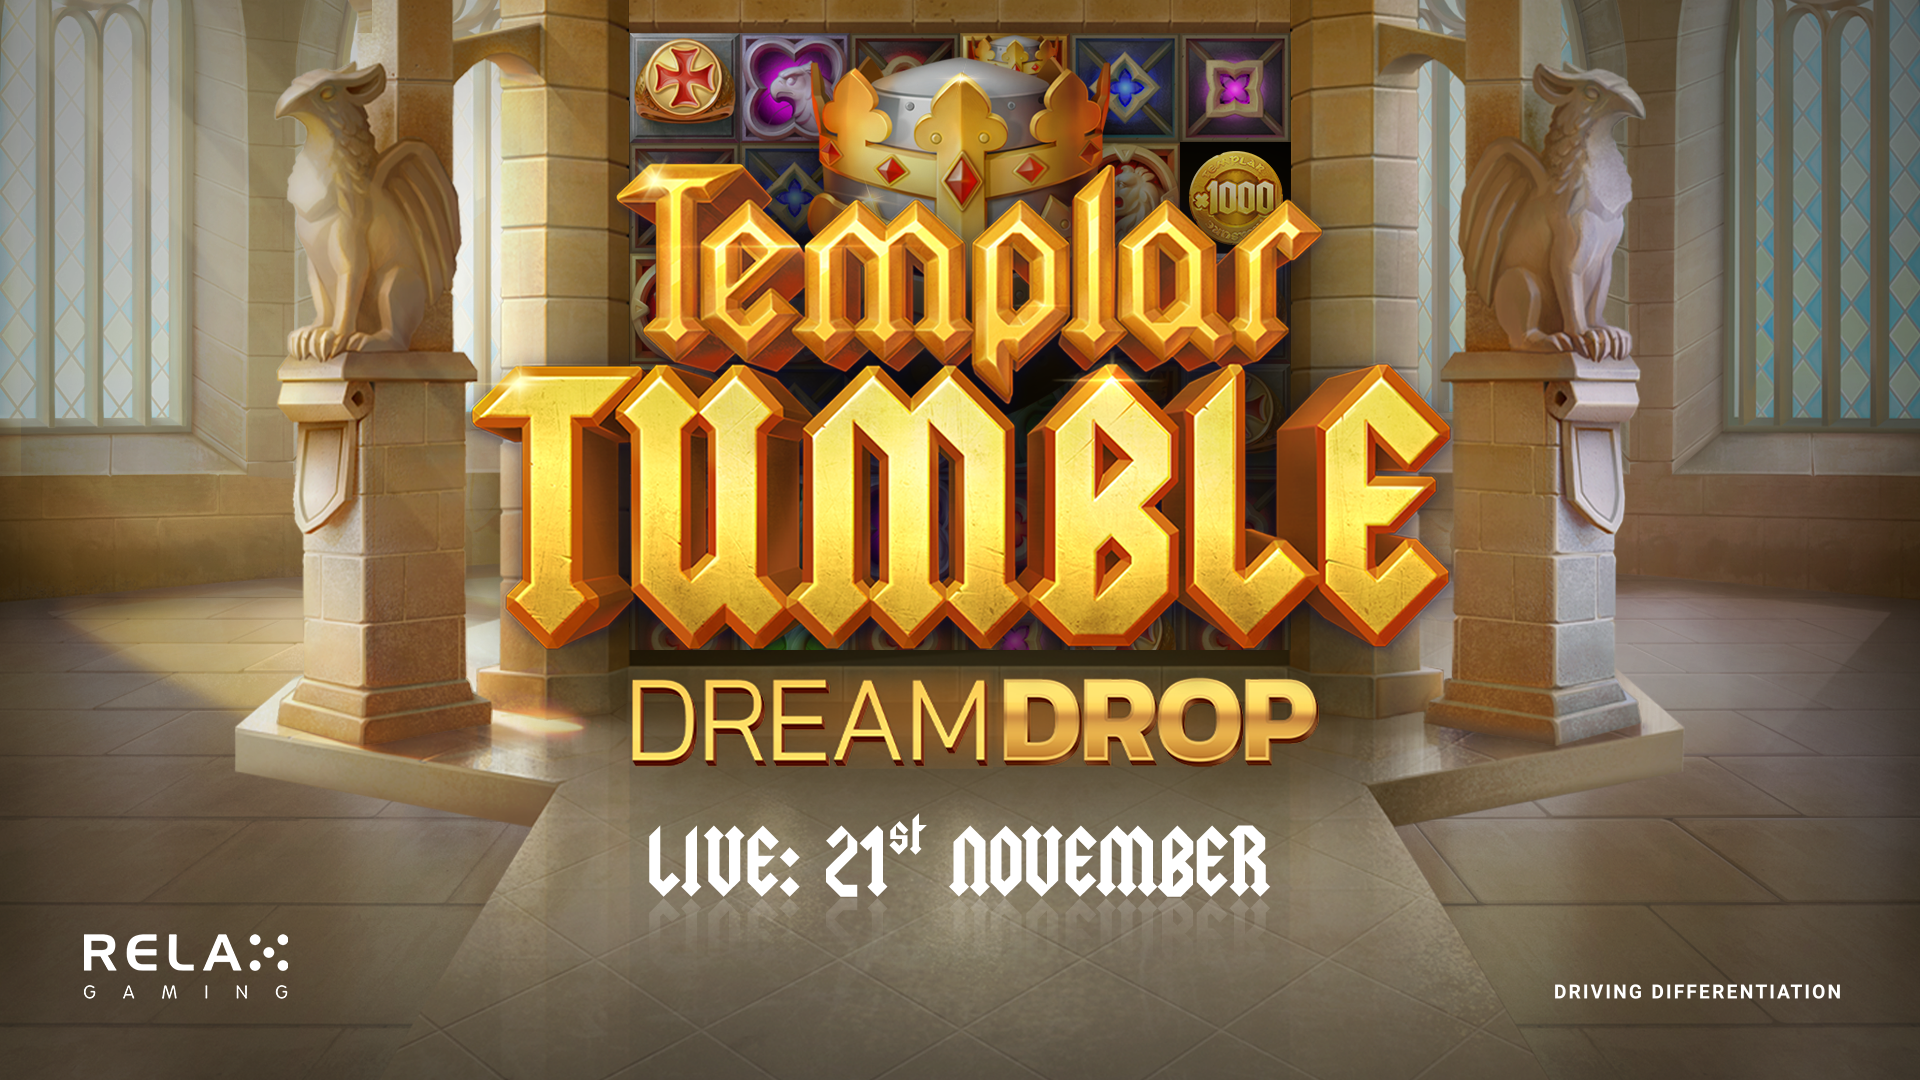 Relax Gaming’s Knights Return in Latest Release Templar Tumble Dream Drop